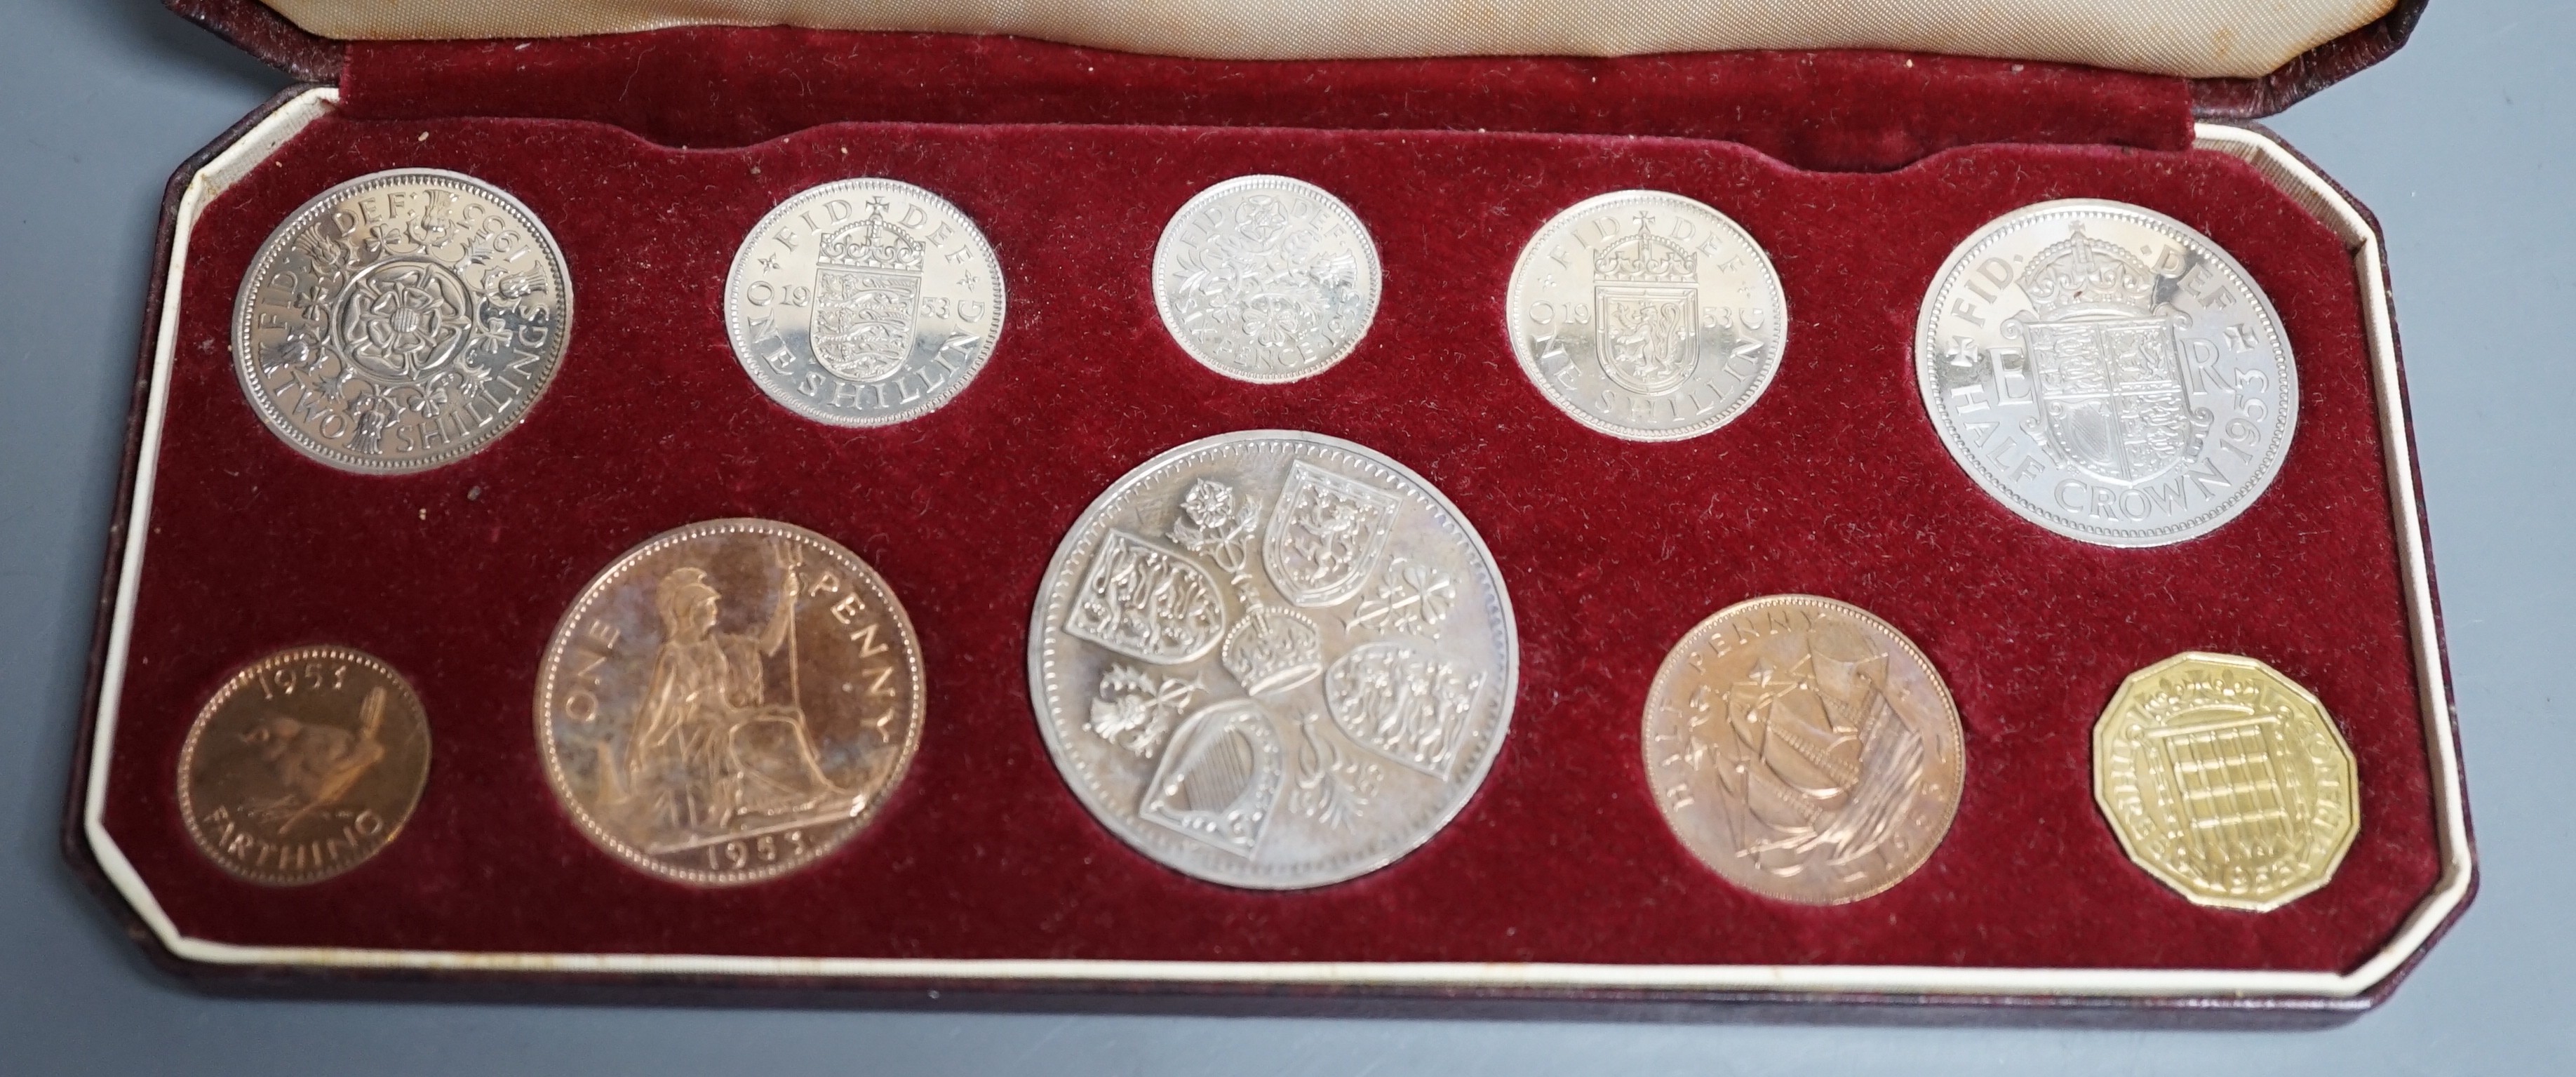 UK coins, a cased QEII proof set of coronation coins, 2nd June 1953